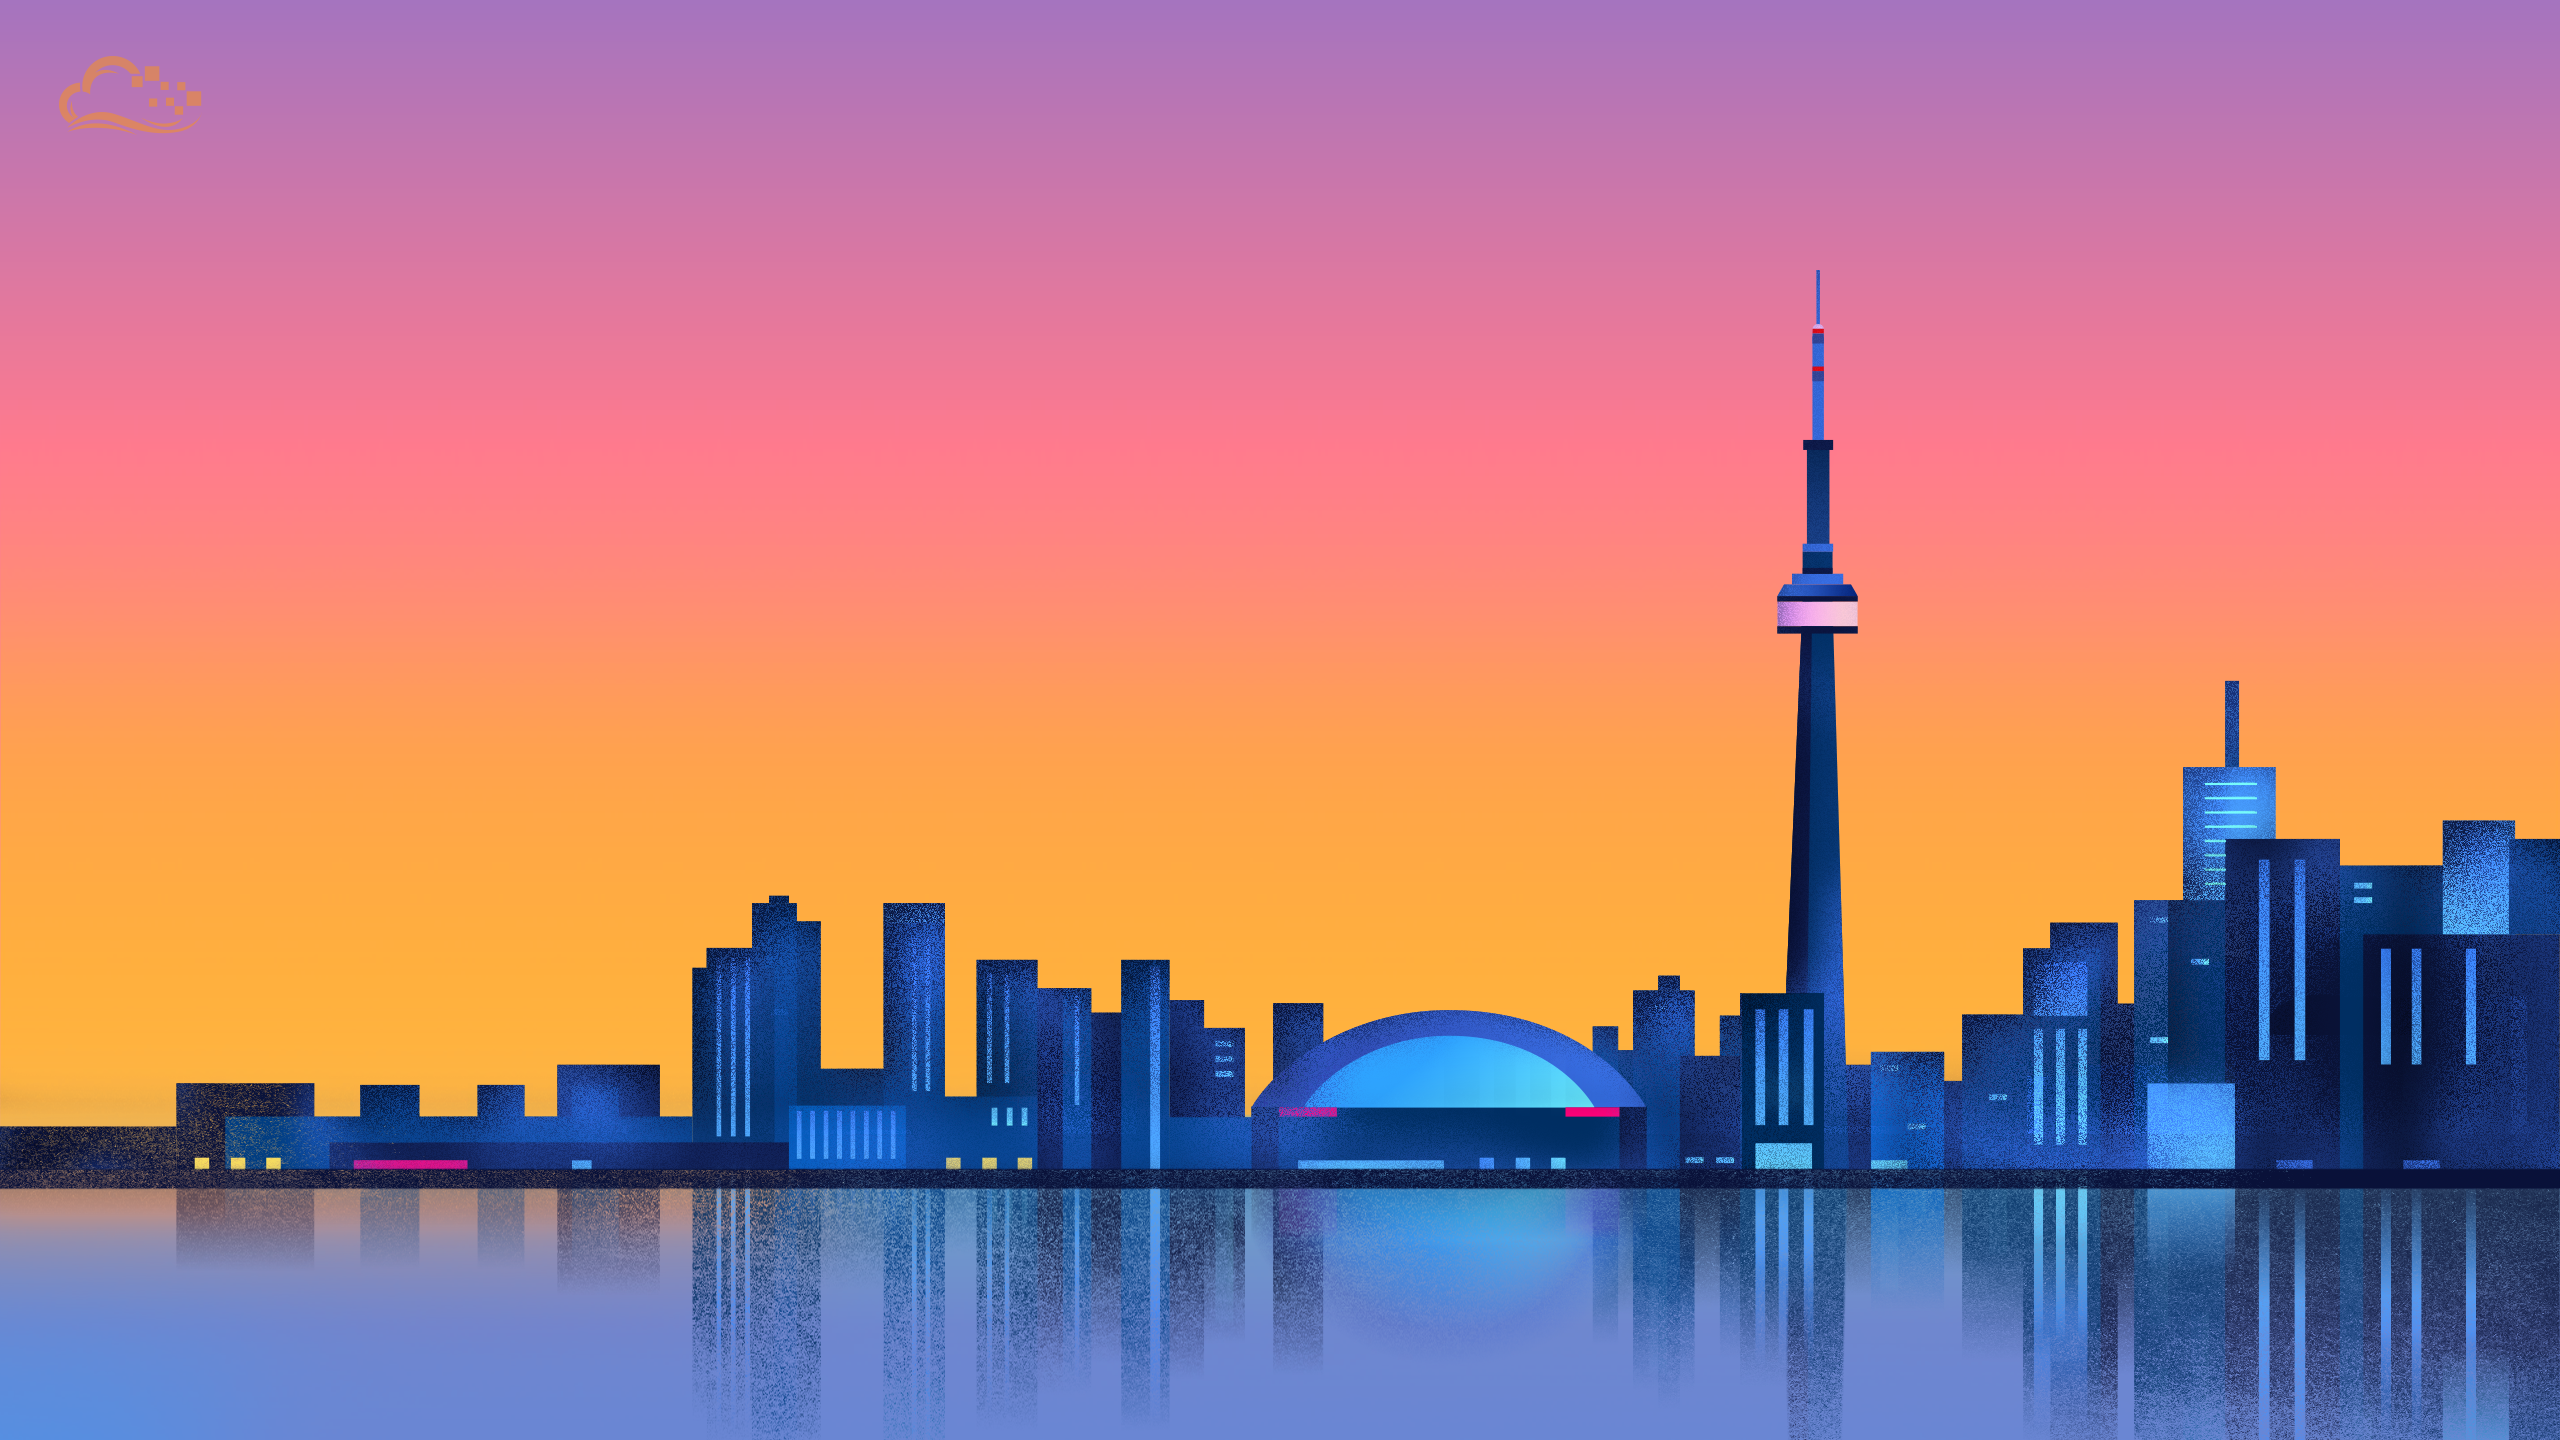 cn tower» 1080P, 2k, 4k HD wallpapers, backgrounds free download | Rare  Gallery